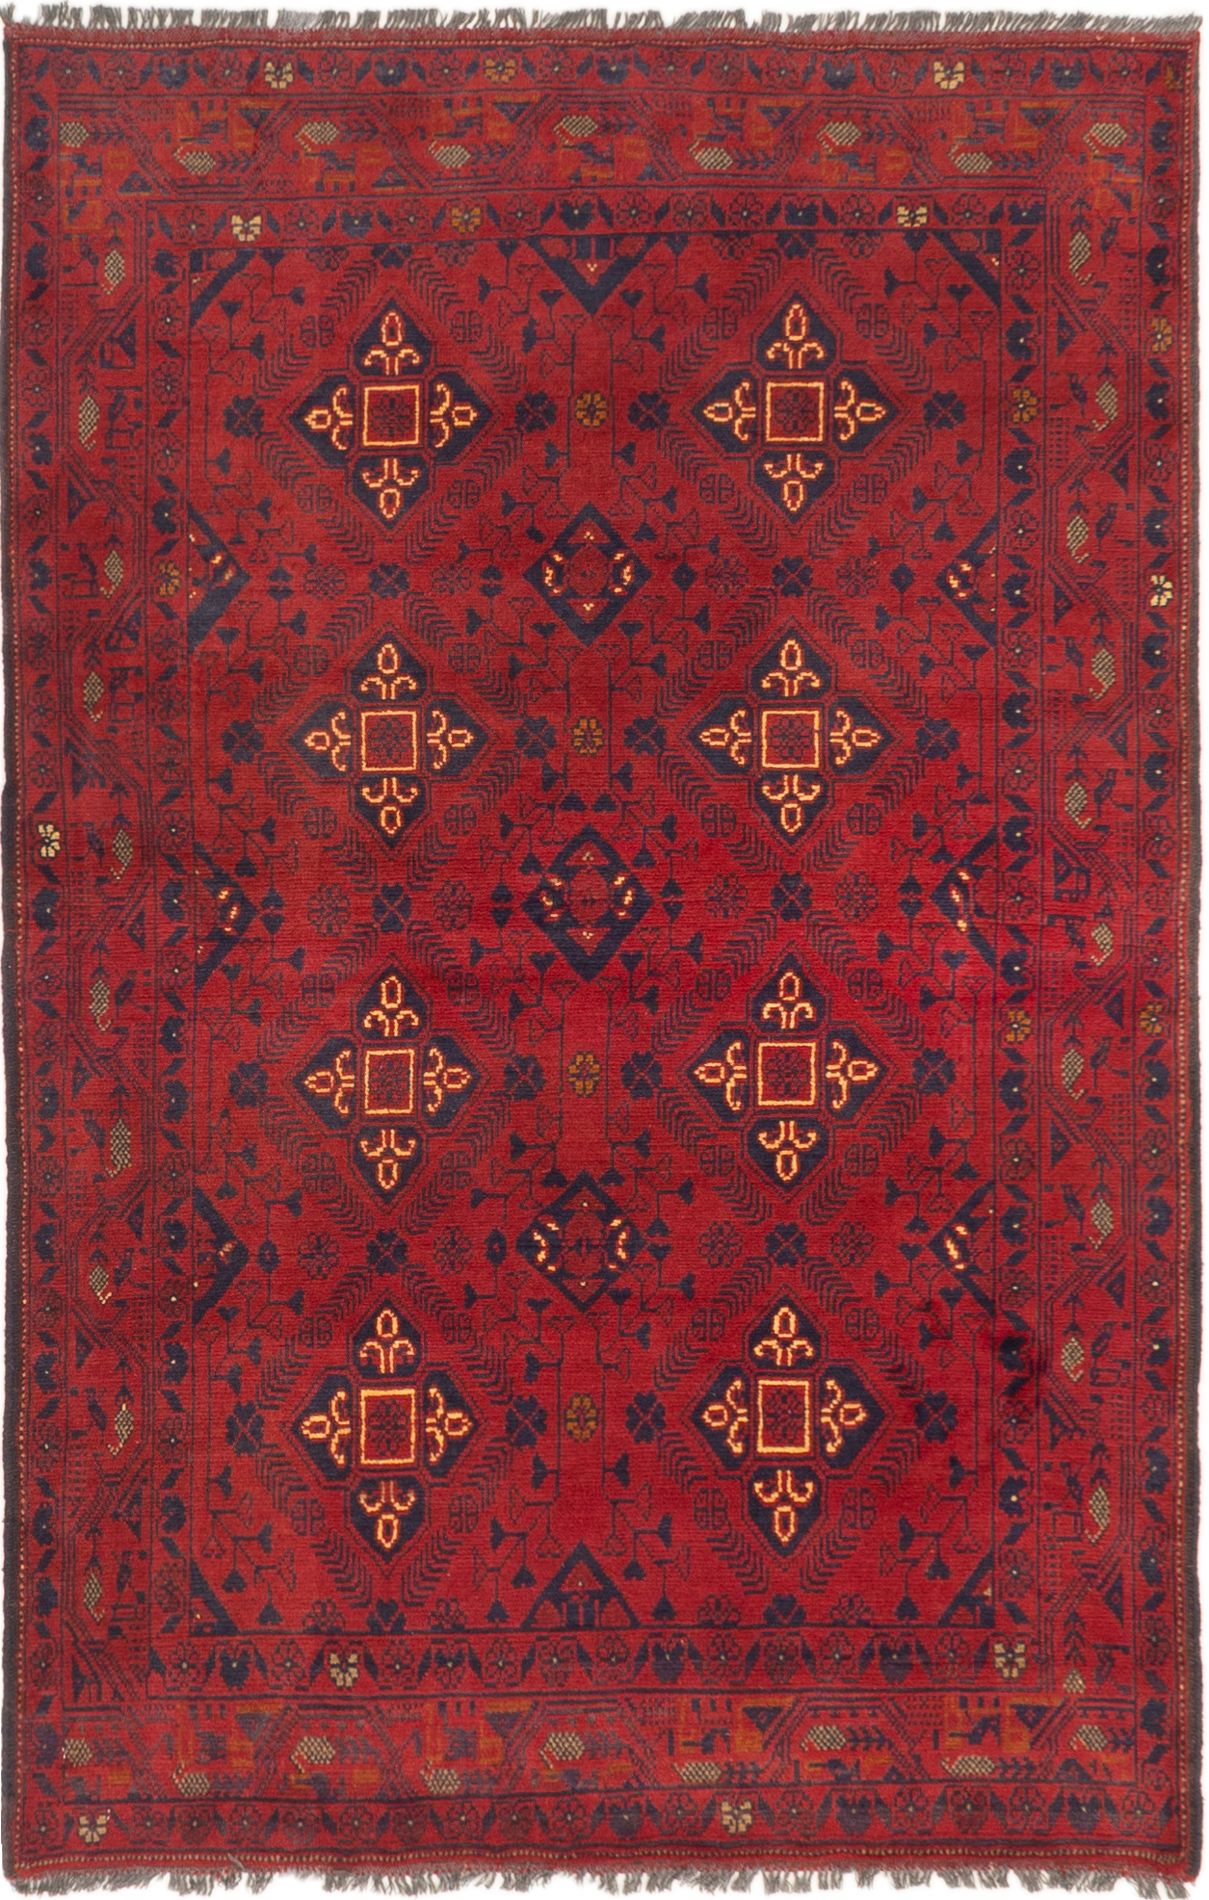 Hand-knotted Finest Khal Mohammadi Dark Red Wool Rug 4'4" x 6'6"  Size: 4'4" x 6'6"  